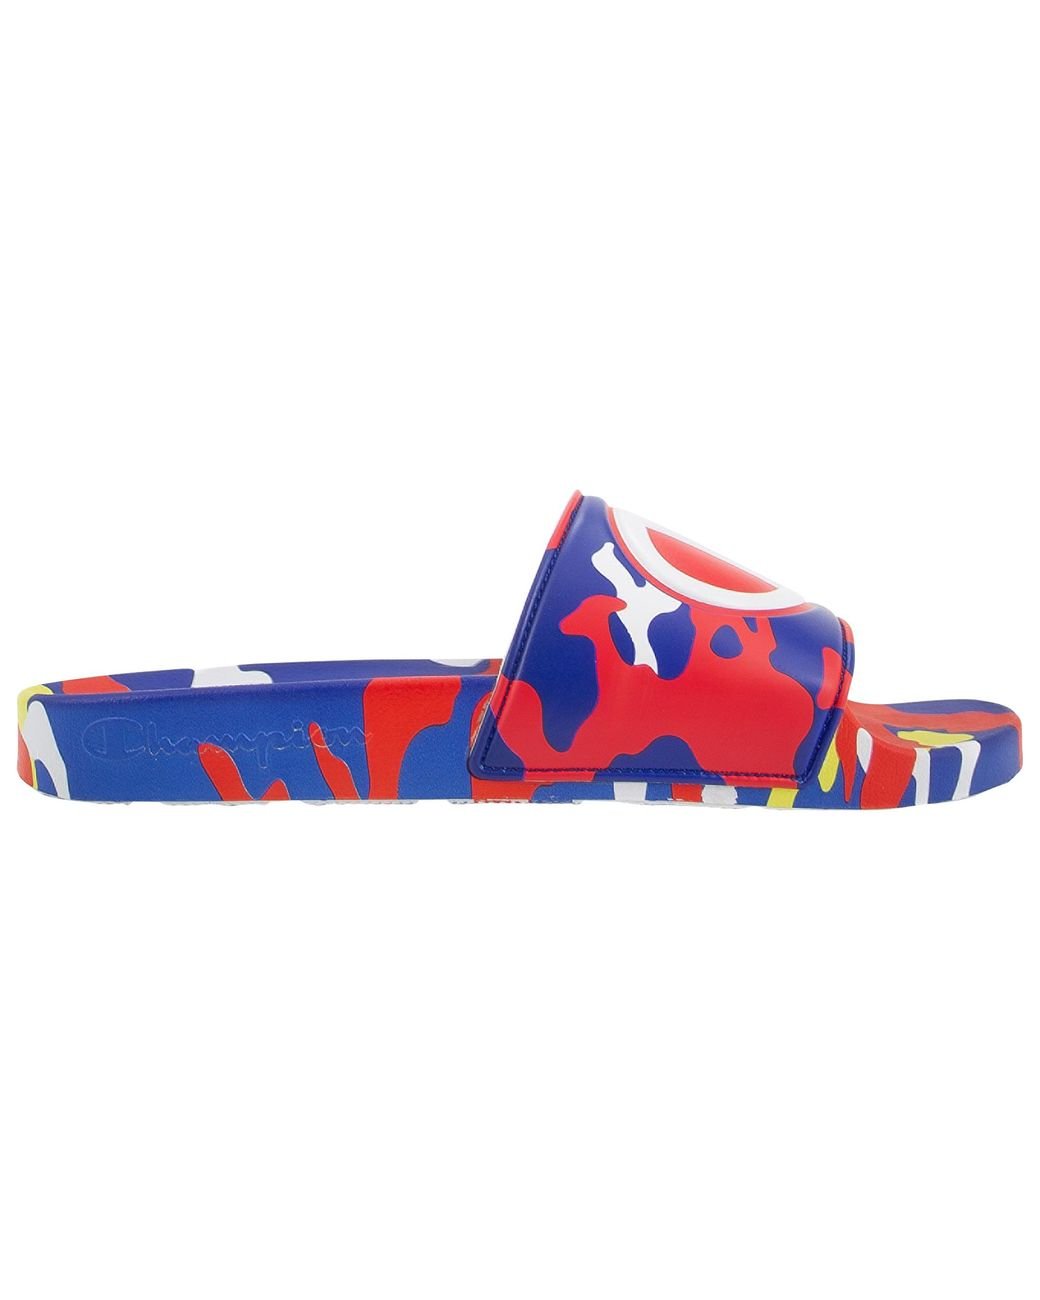 Champion Ipo Camo Slides - Shoes in Blue for Men - Lyst